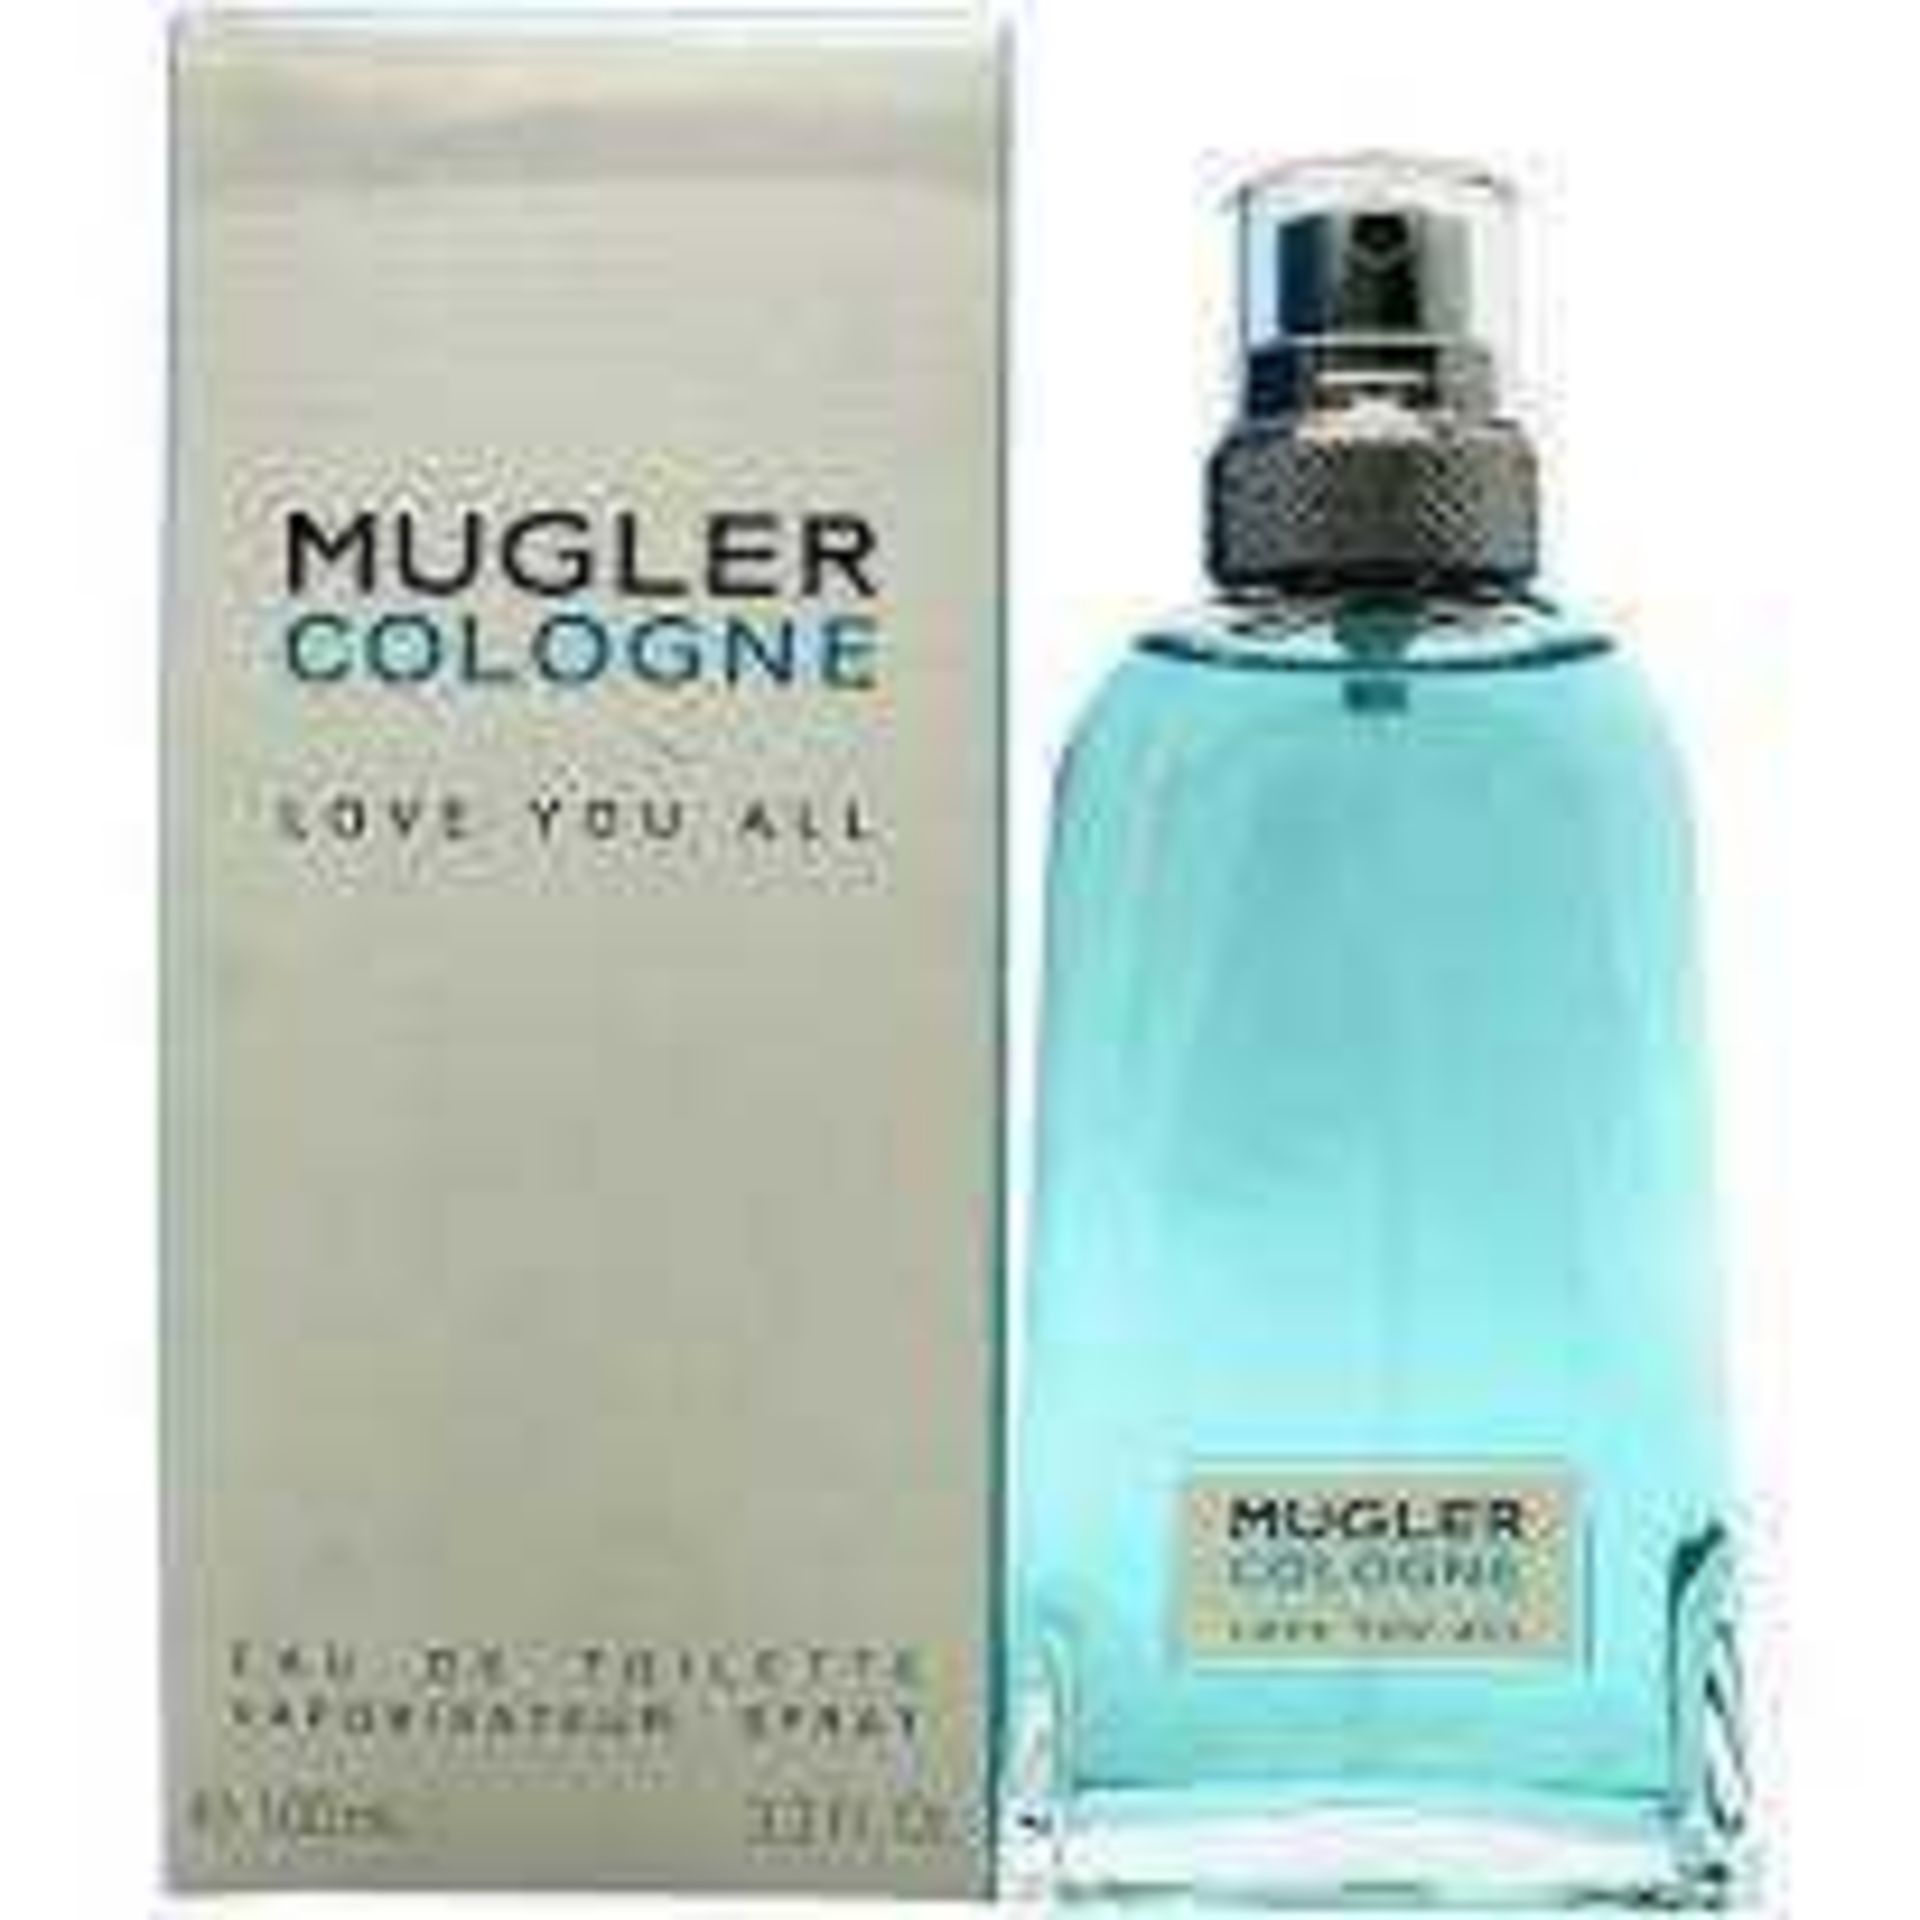 RRP £55 Boxed Unused Ex-Display Tester Bottle Of Thierry Mugler Cologne Love You All 100Ml Edt